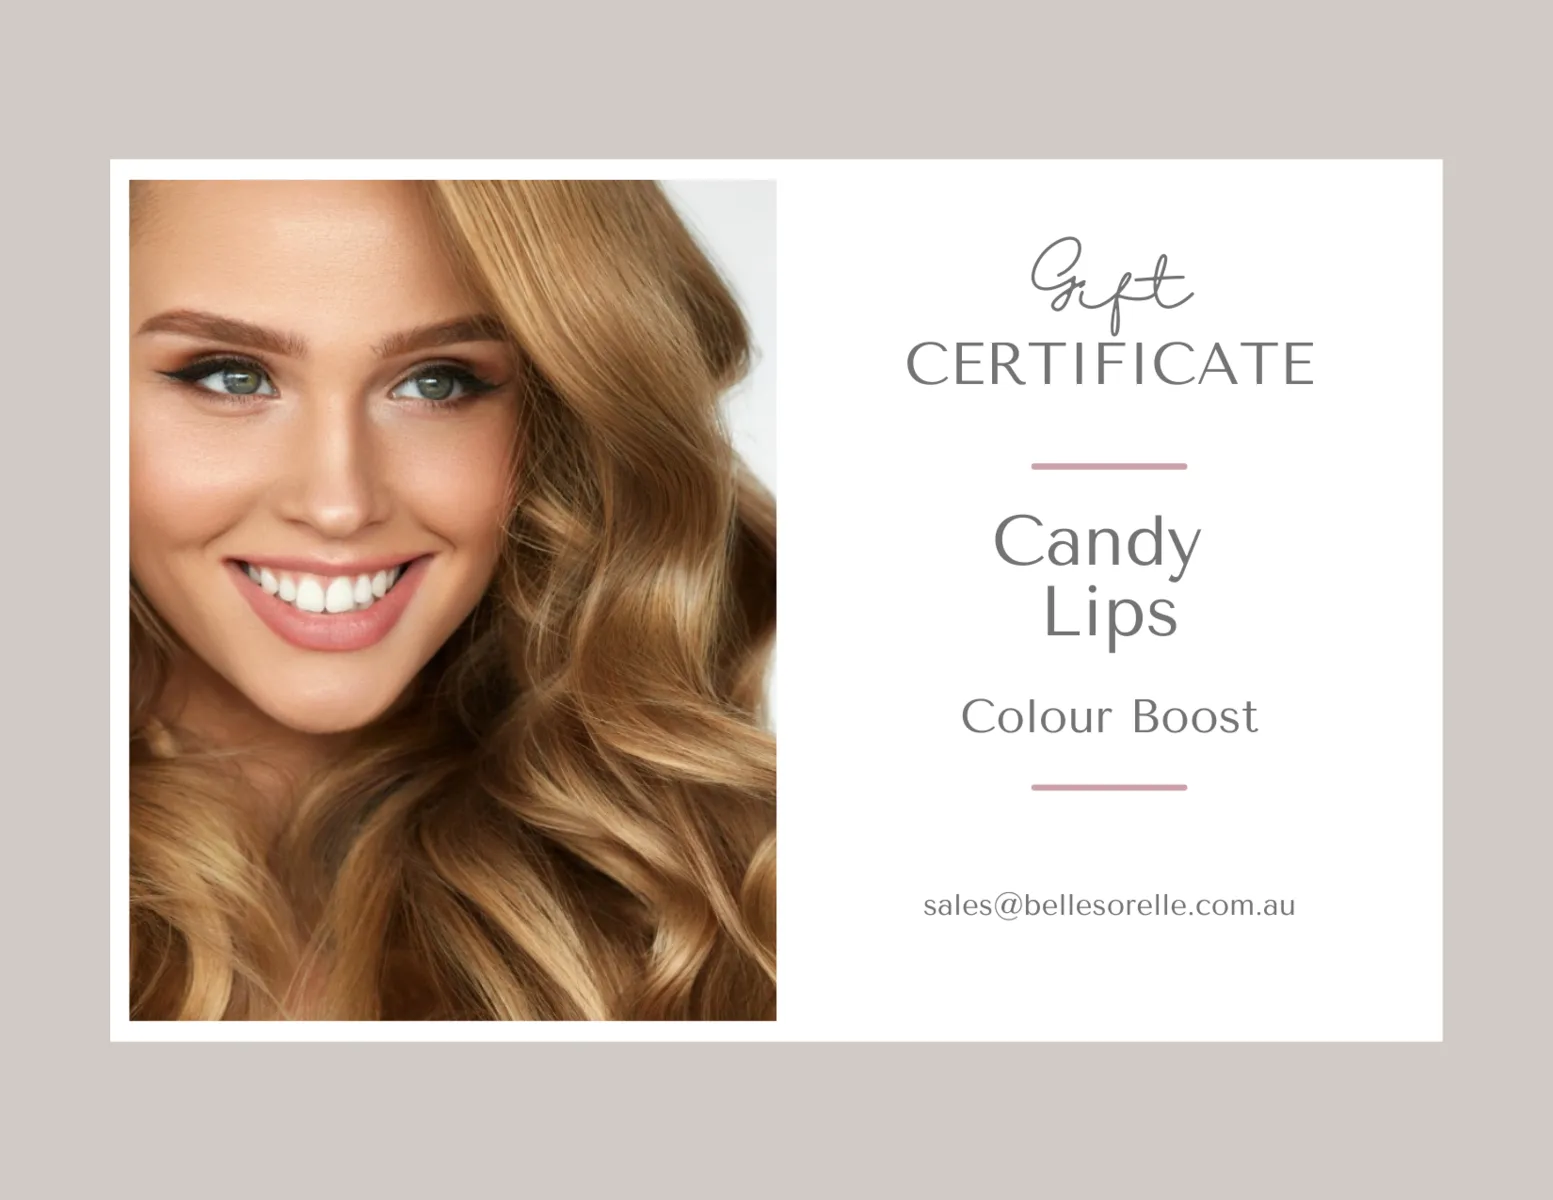 Candy Lips - Colour Boost